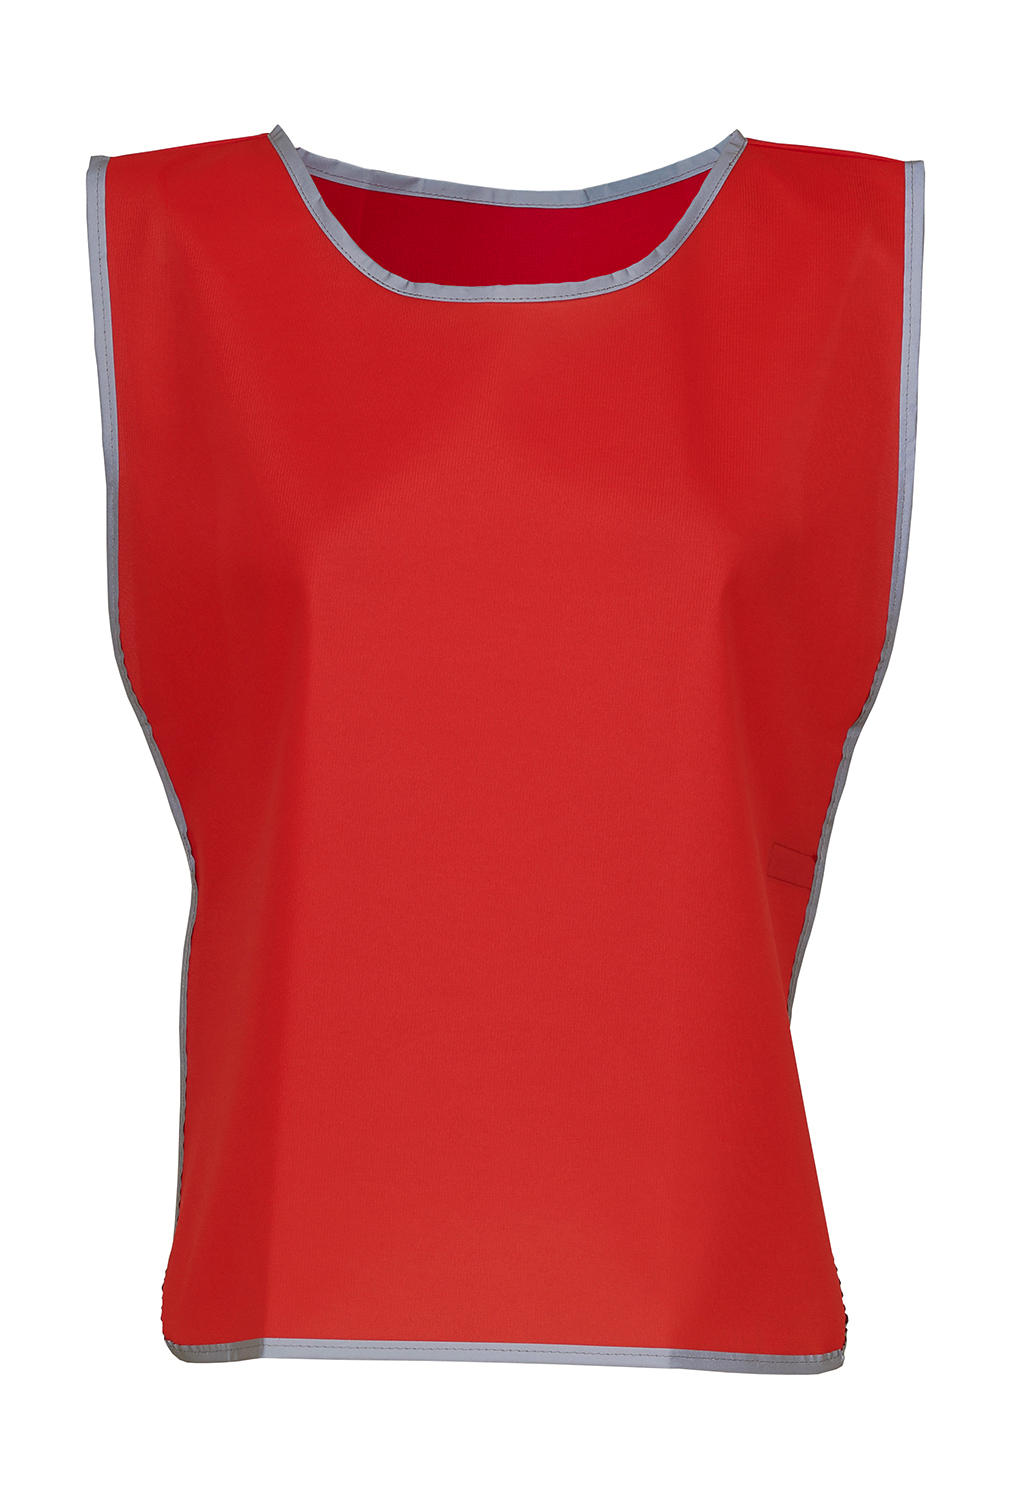  Fluo Reflective Border Tabard in Farbe Red